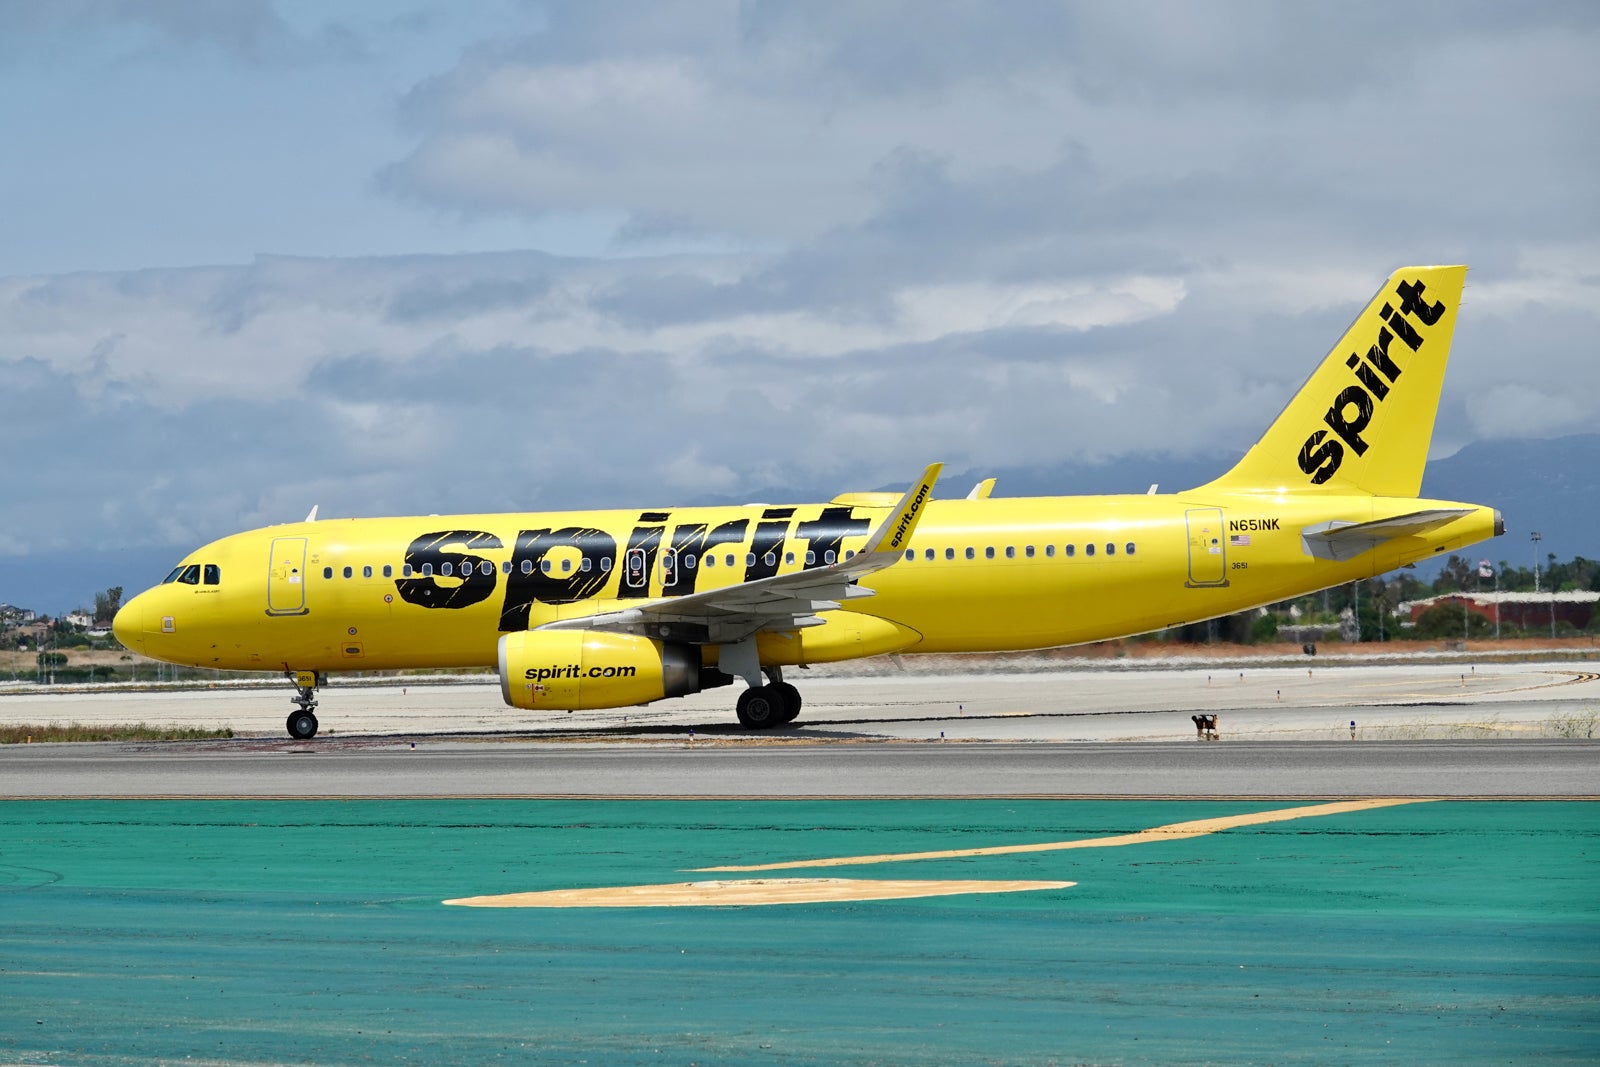 Spirit Airlines eyes more connecting flights, less reliance on Florida as it attempts business turnaround